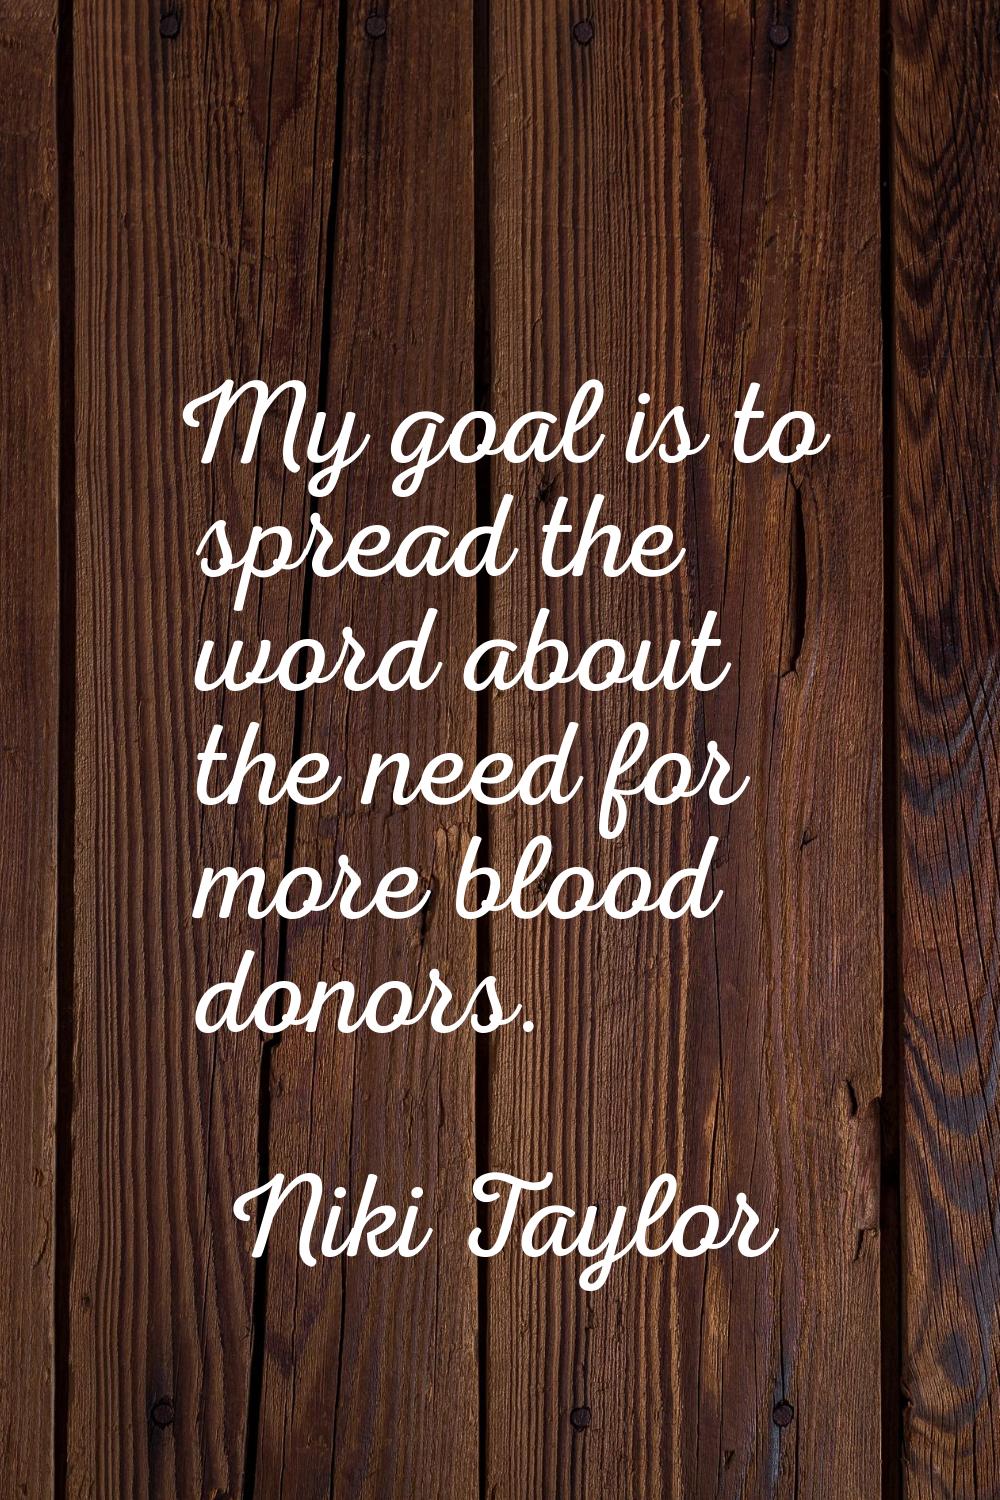 My goal is to spread the word about the need for more blood donors.